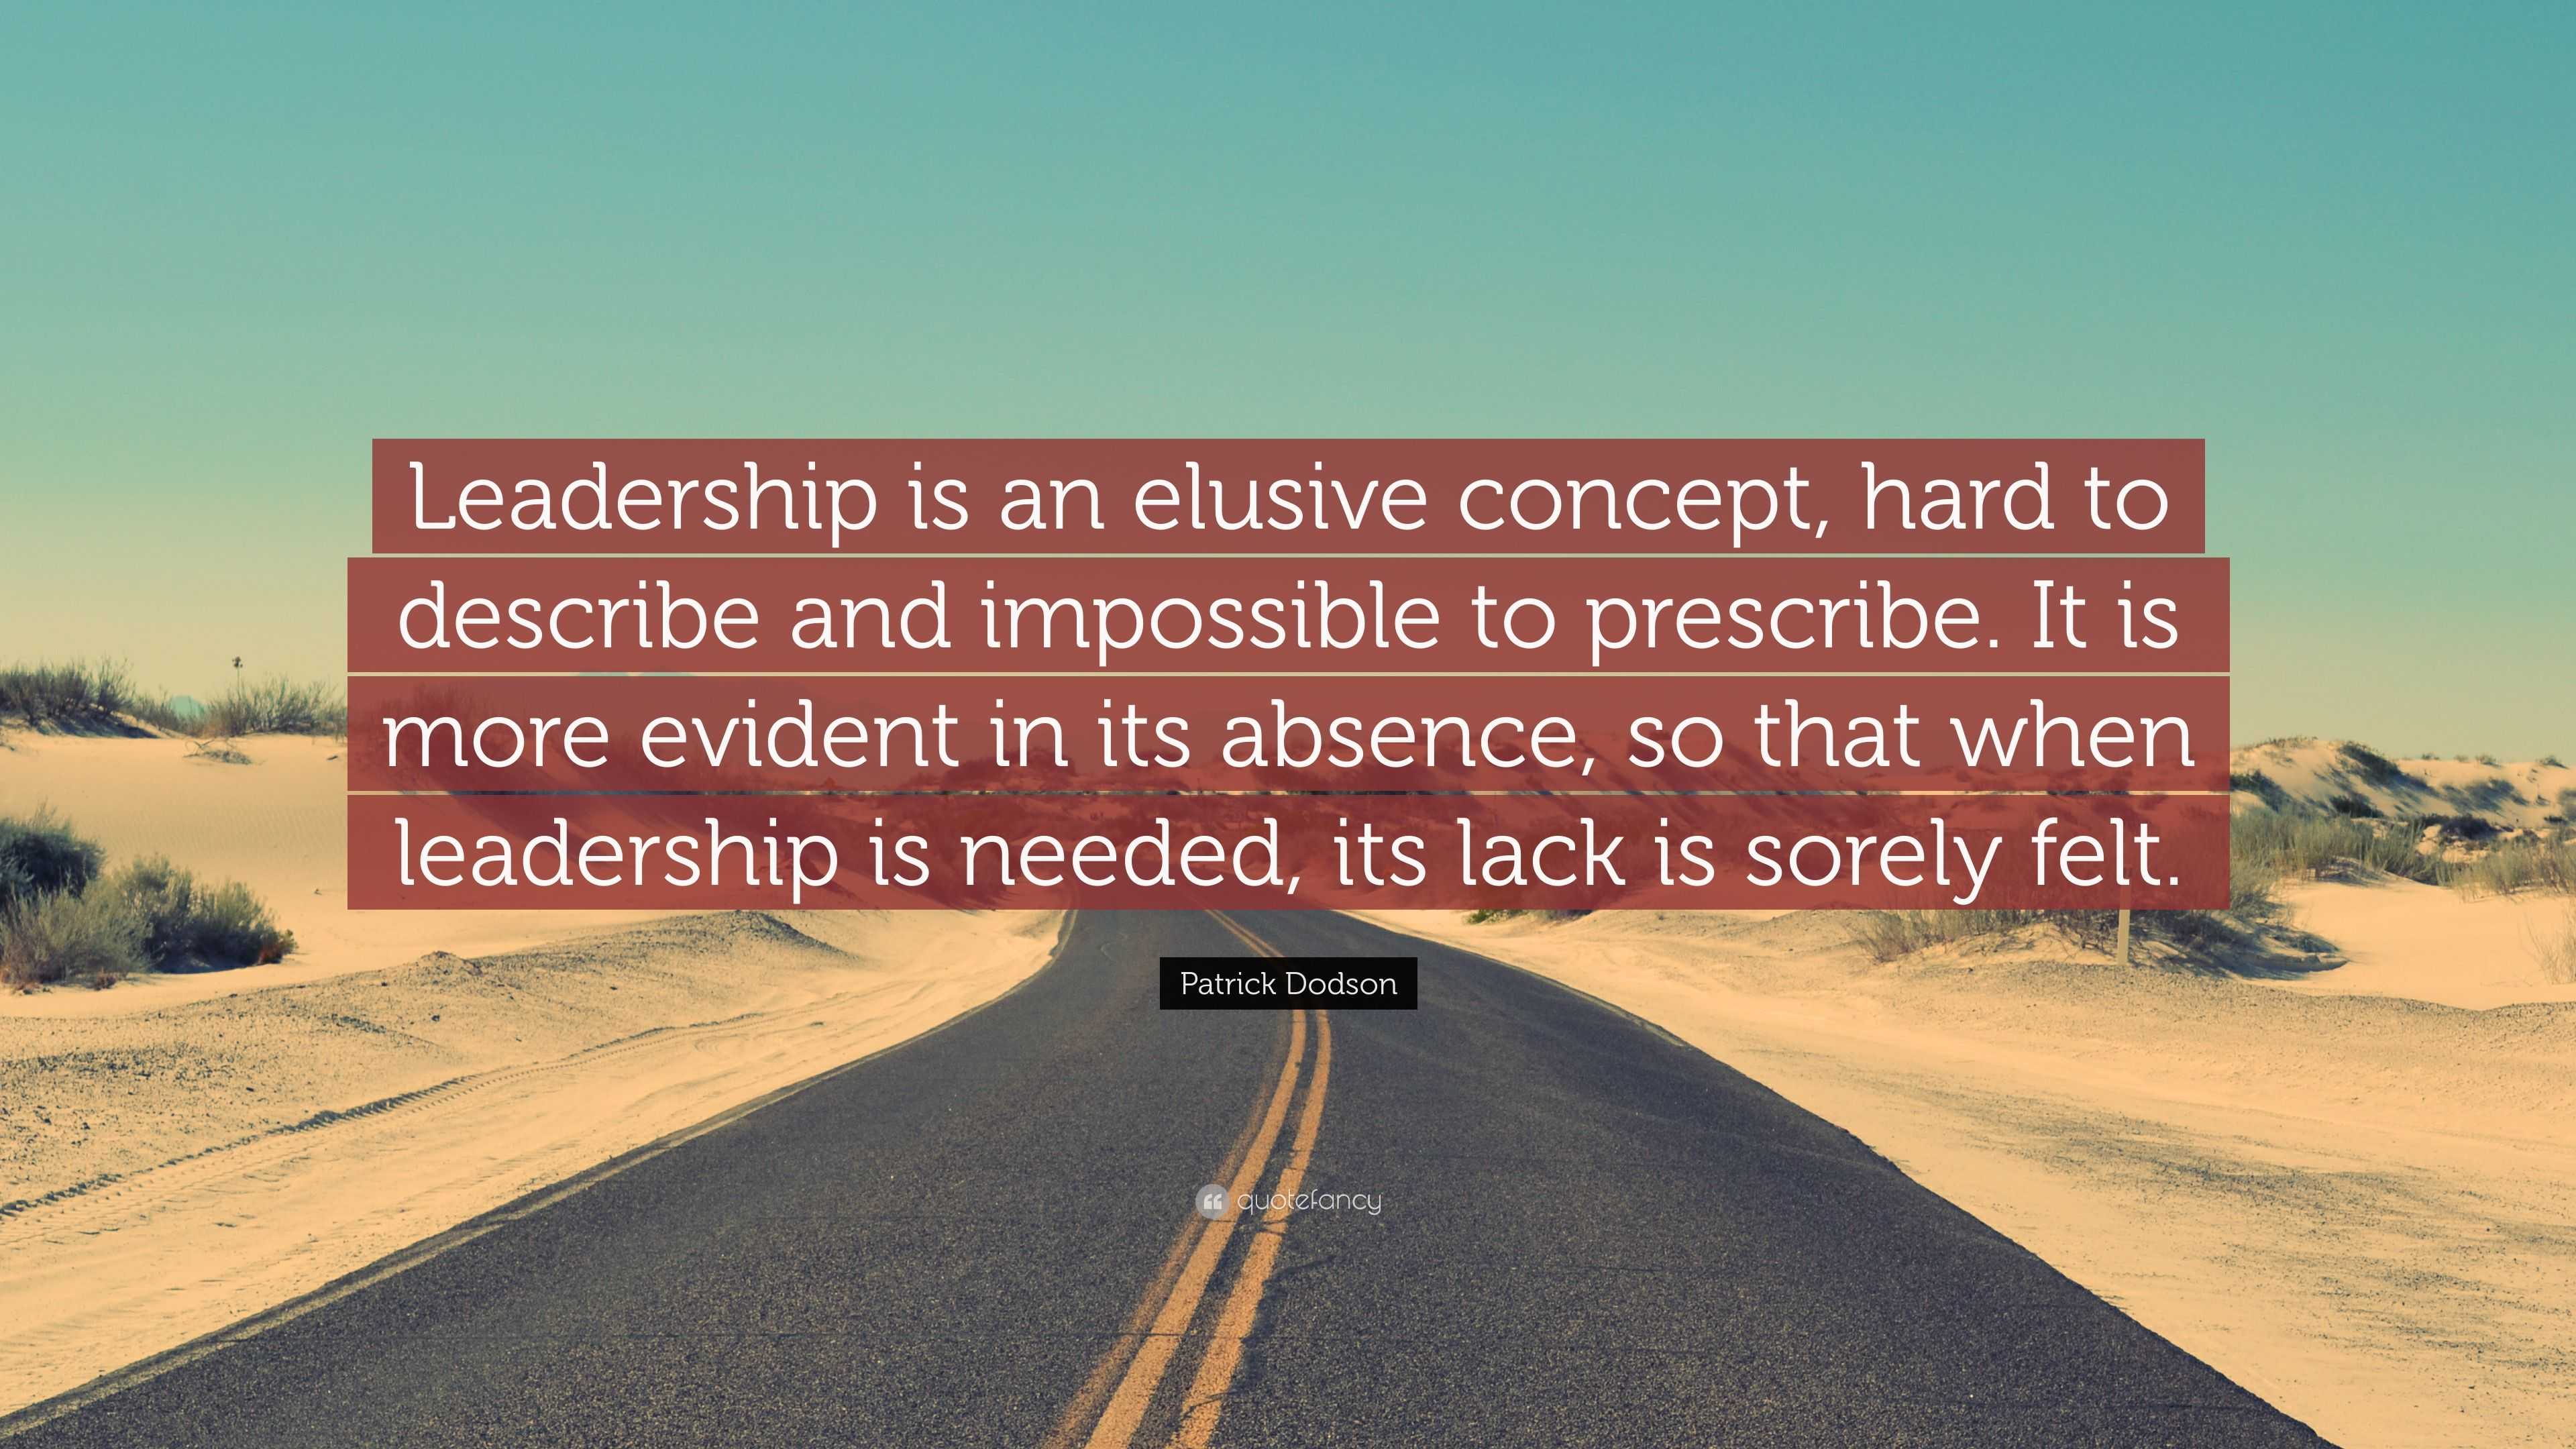 Patrick Dodson Quote: “Leadership is an elusive concept, hard to ...